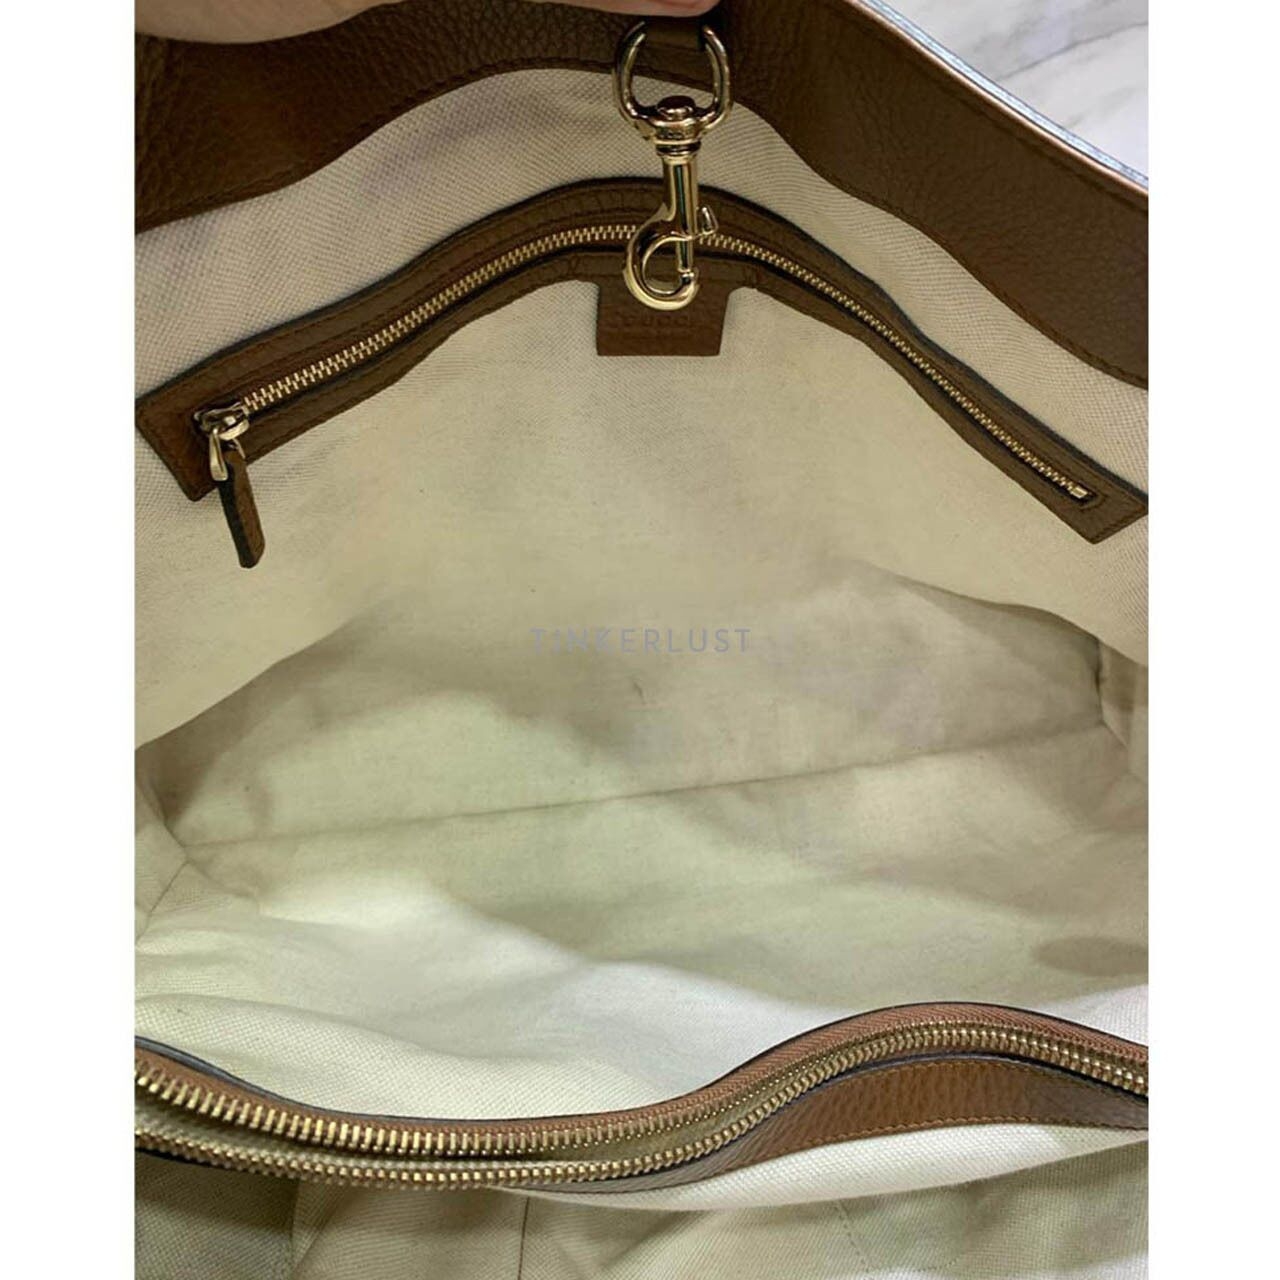 Gucci Bella Bamboo Canvas Leather Brown Tote Bag